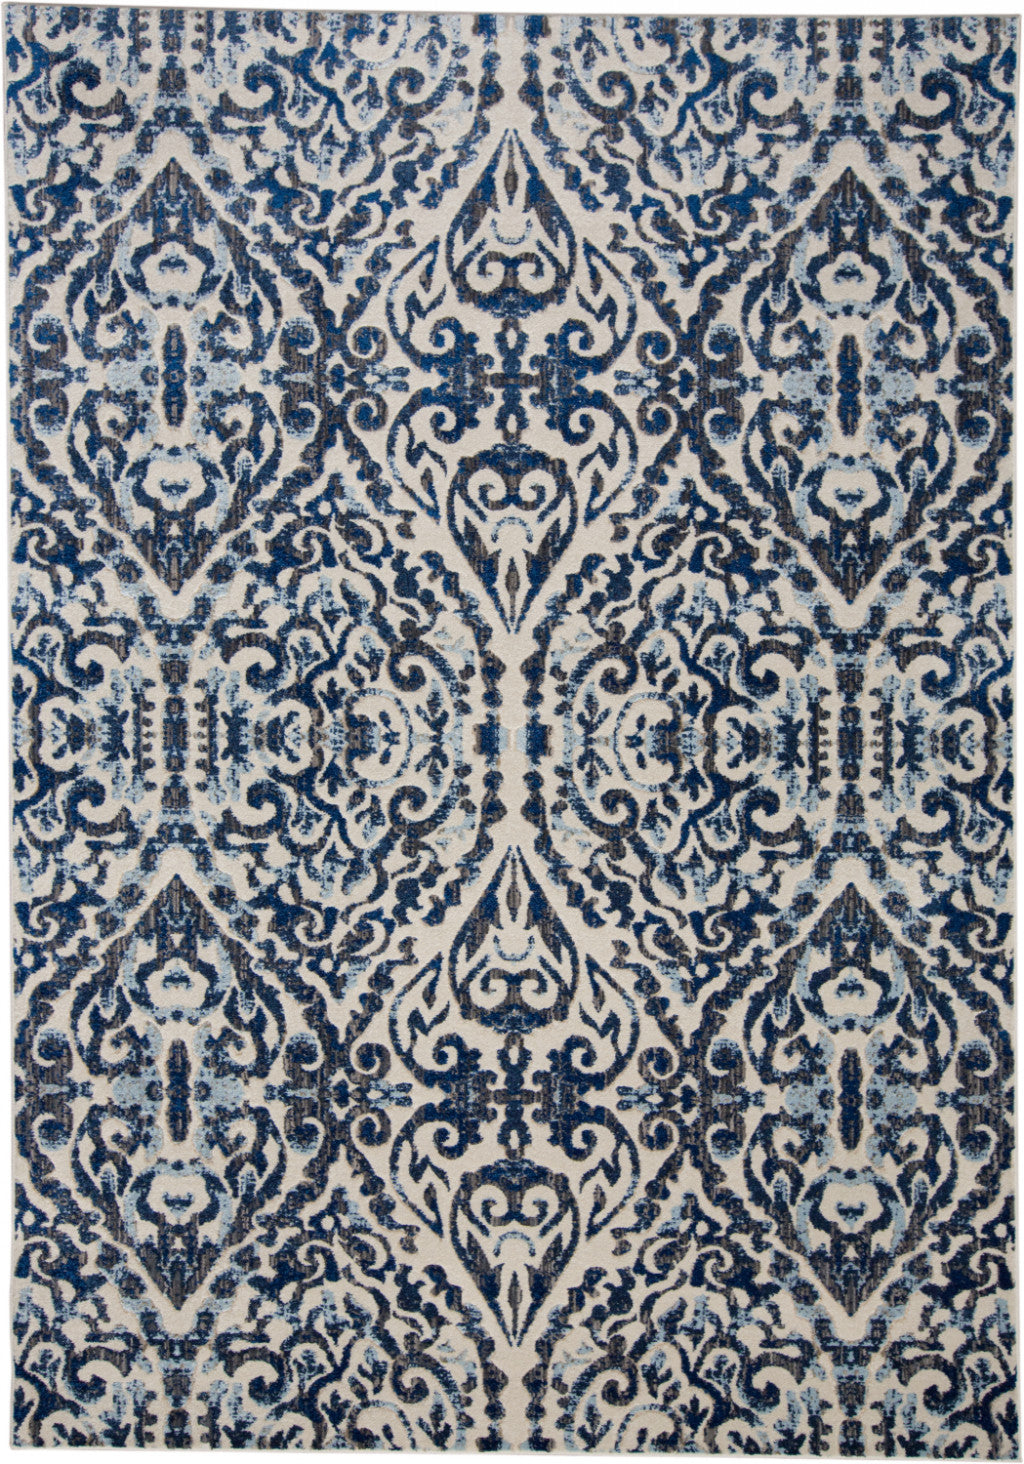 '9' Blue Ivory And Black Round Floral Distressed Stain Resistant Area Rug